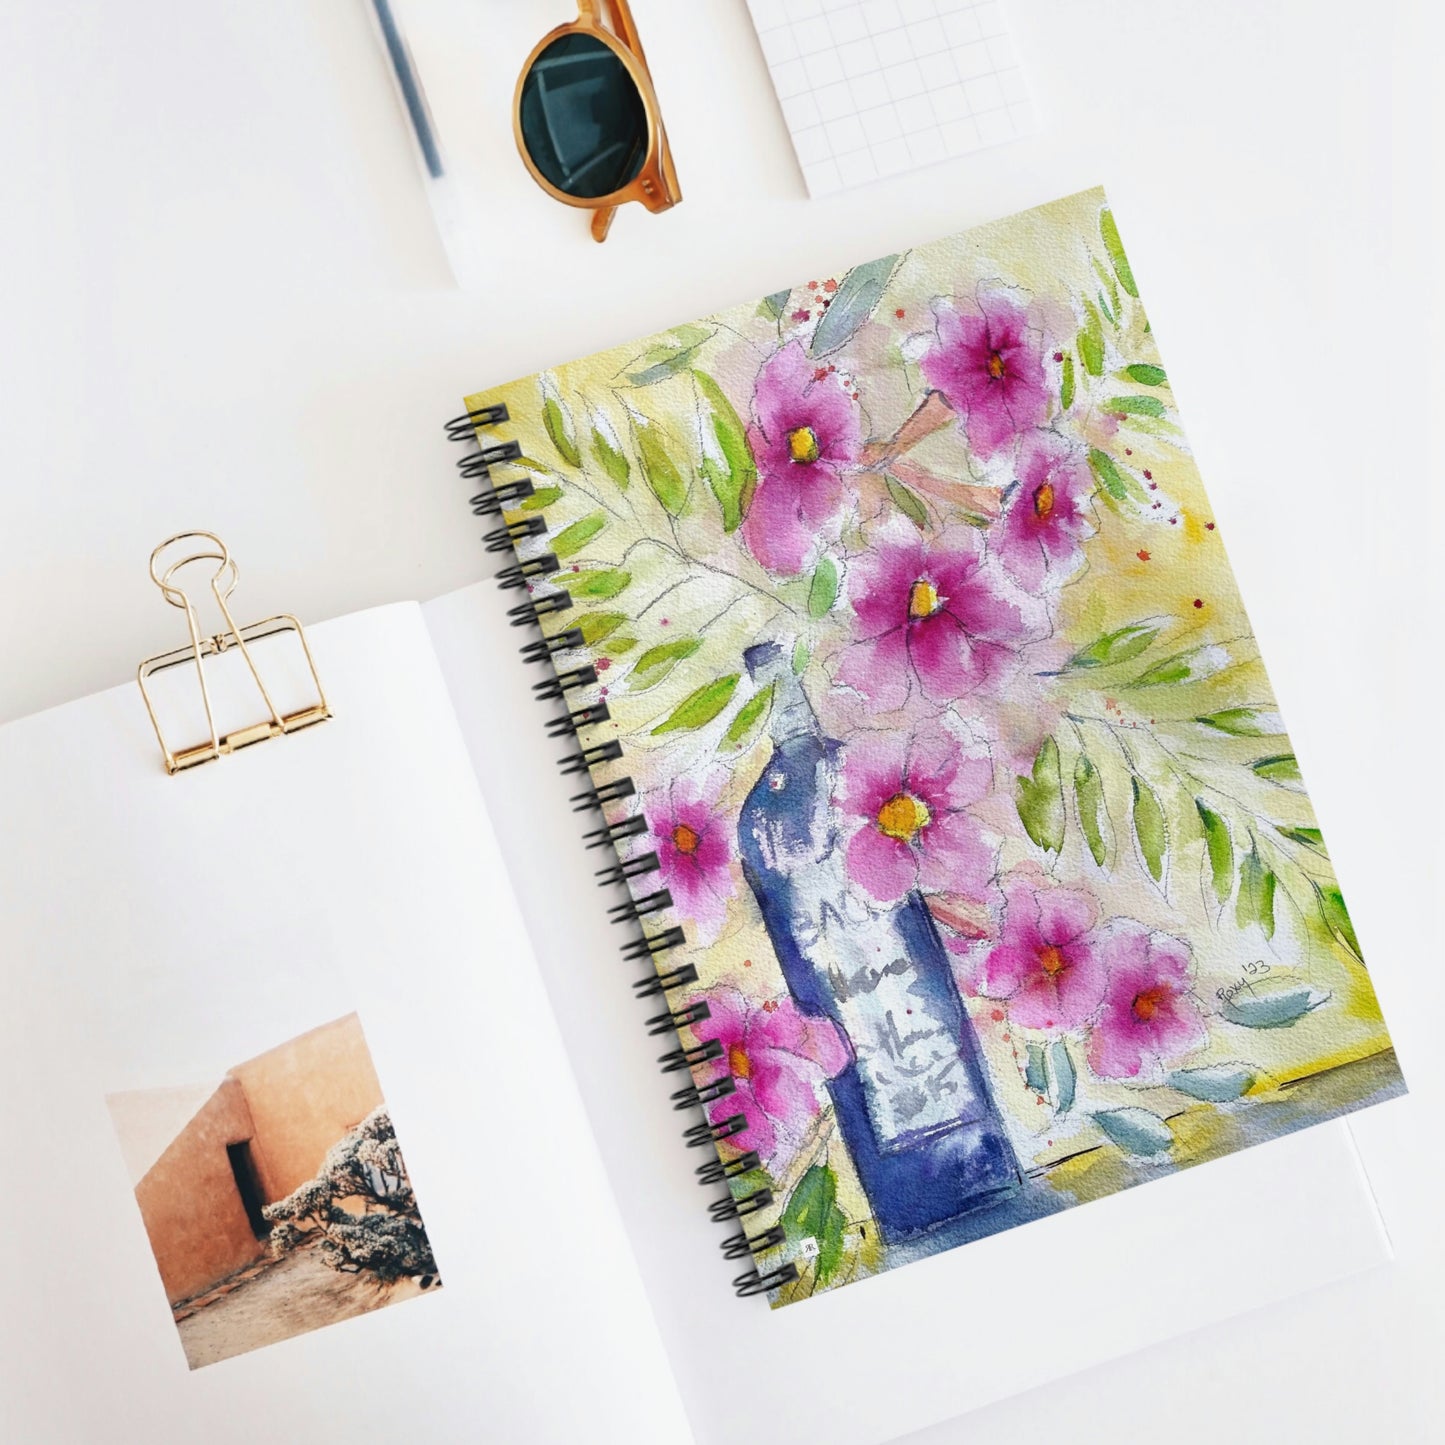 Bottle and Blooms Spiral Notebook